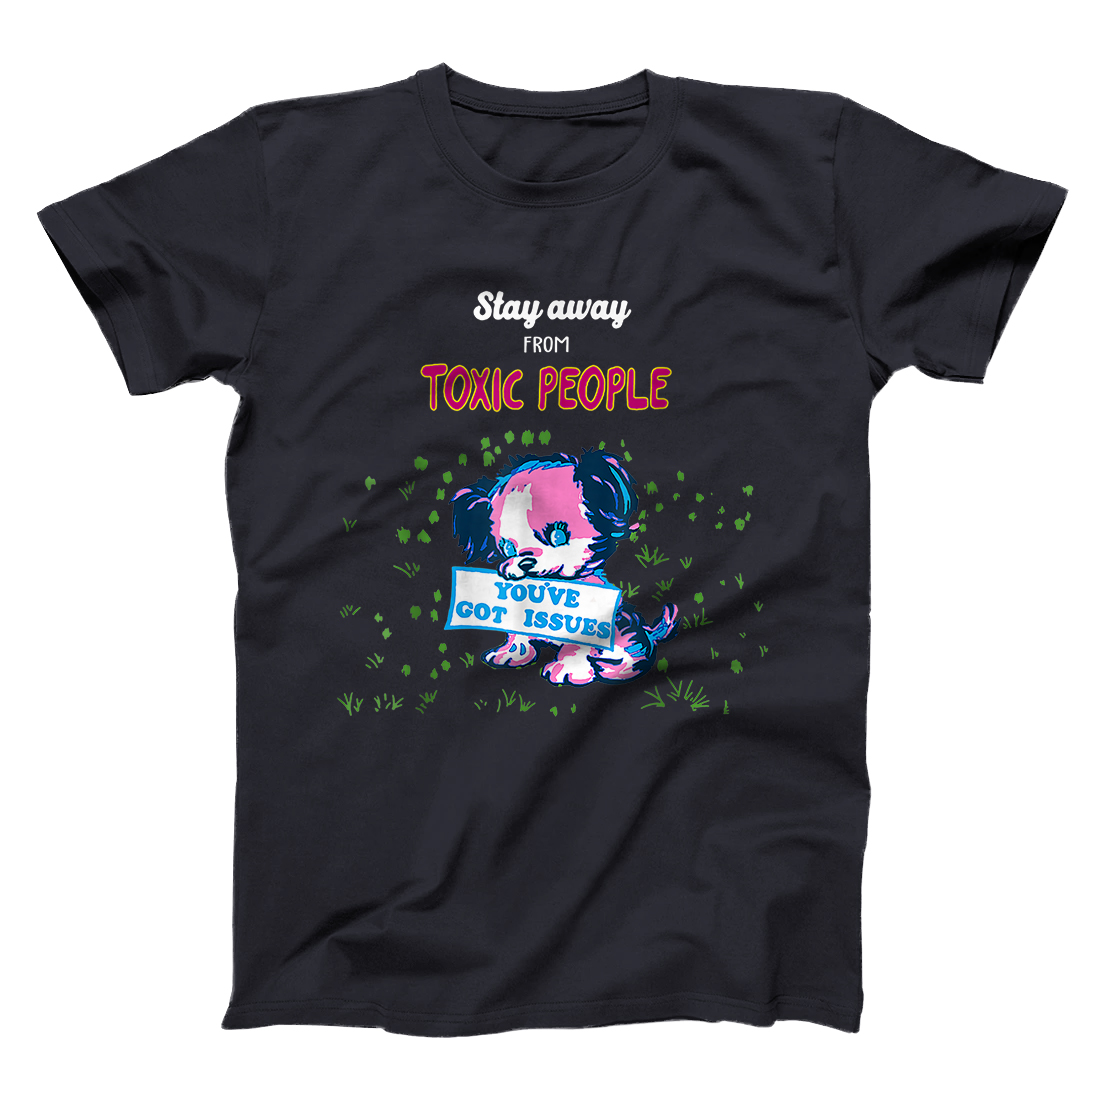 Stay away from toxic people T-Shirt - All Star Shirt